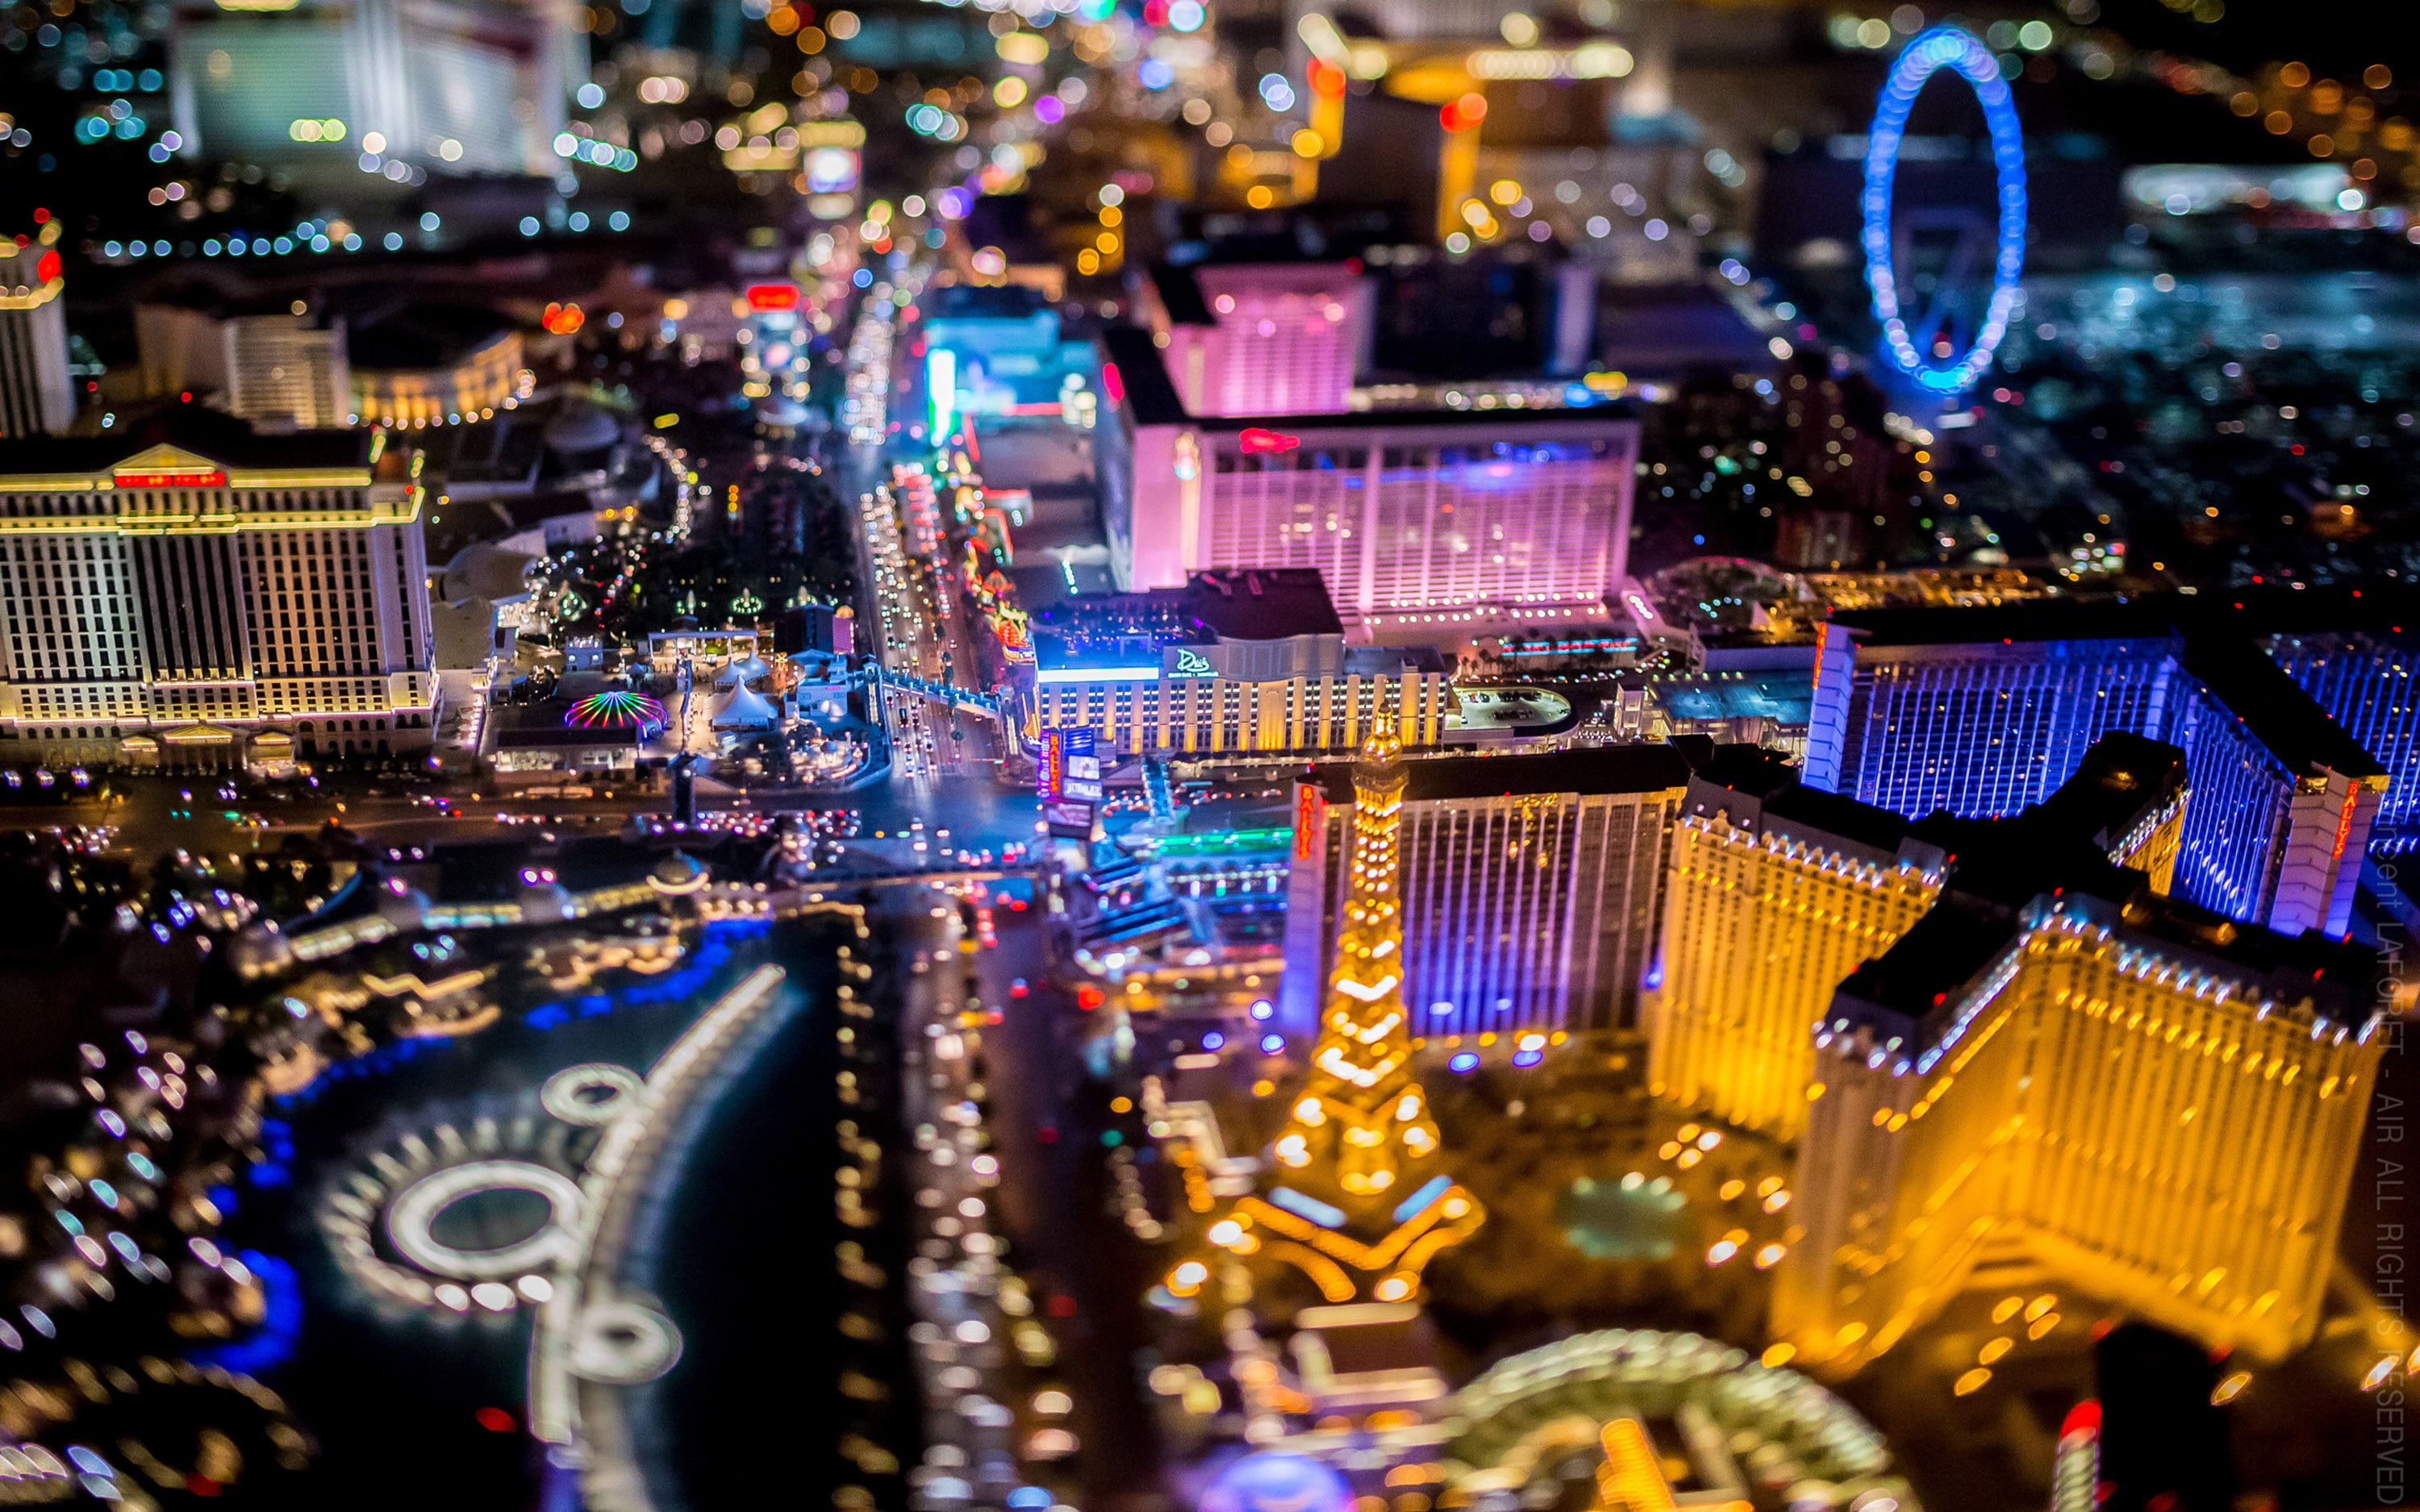 Las Vegas Nevada Downtown Night Photography From Helicopters Desktop Wallpaper HD 3000×1875 K #wallpaper #hdwal. Las vegas resorts, Las vegas, Night photography